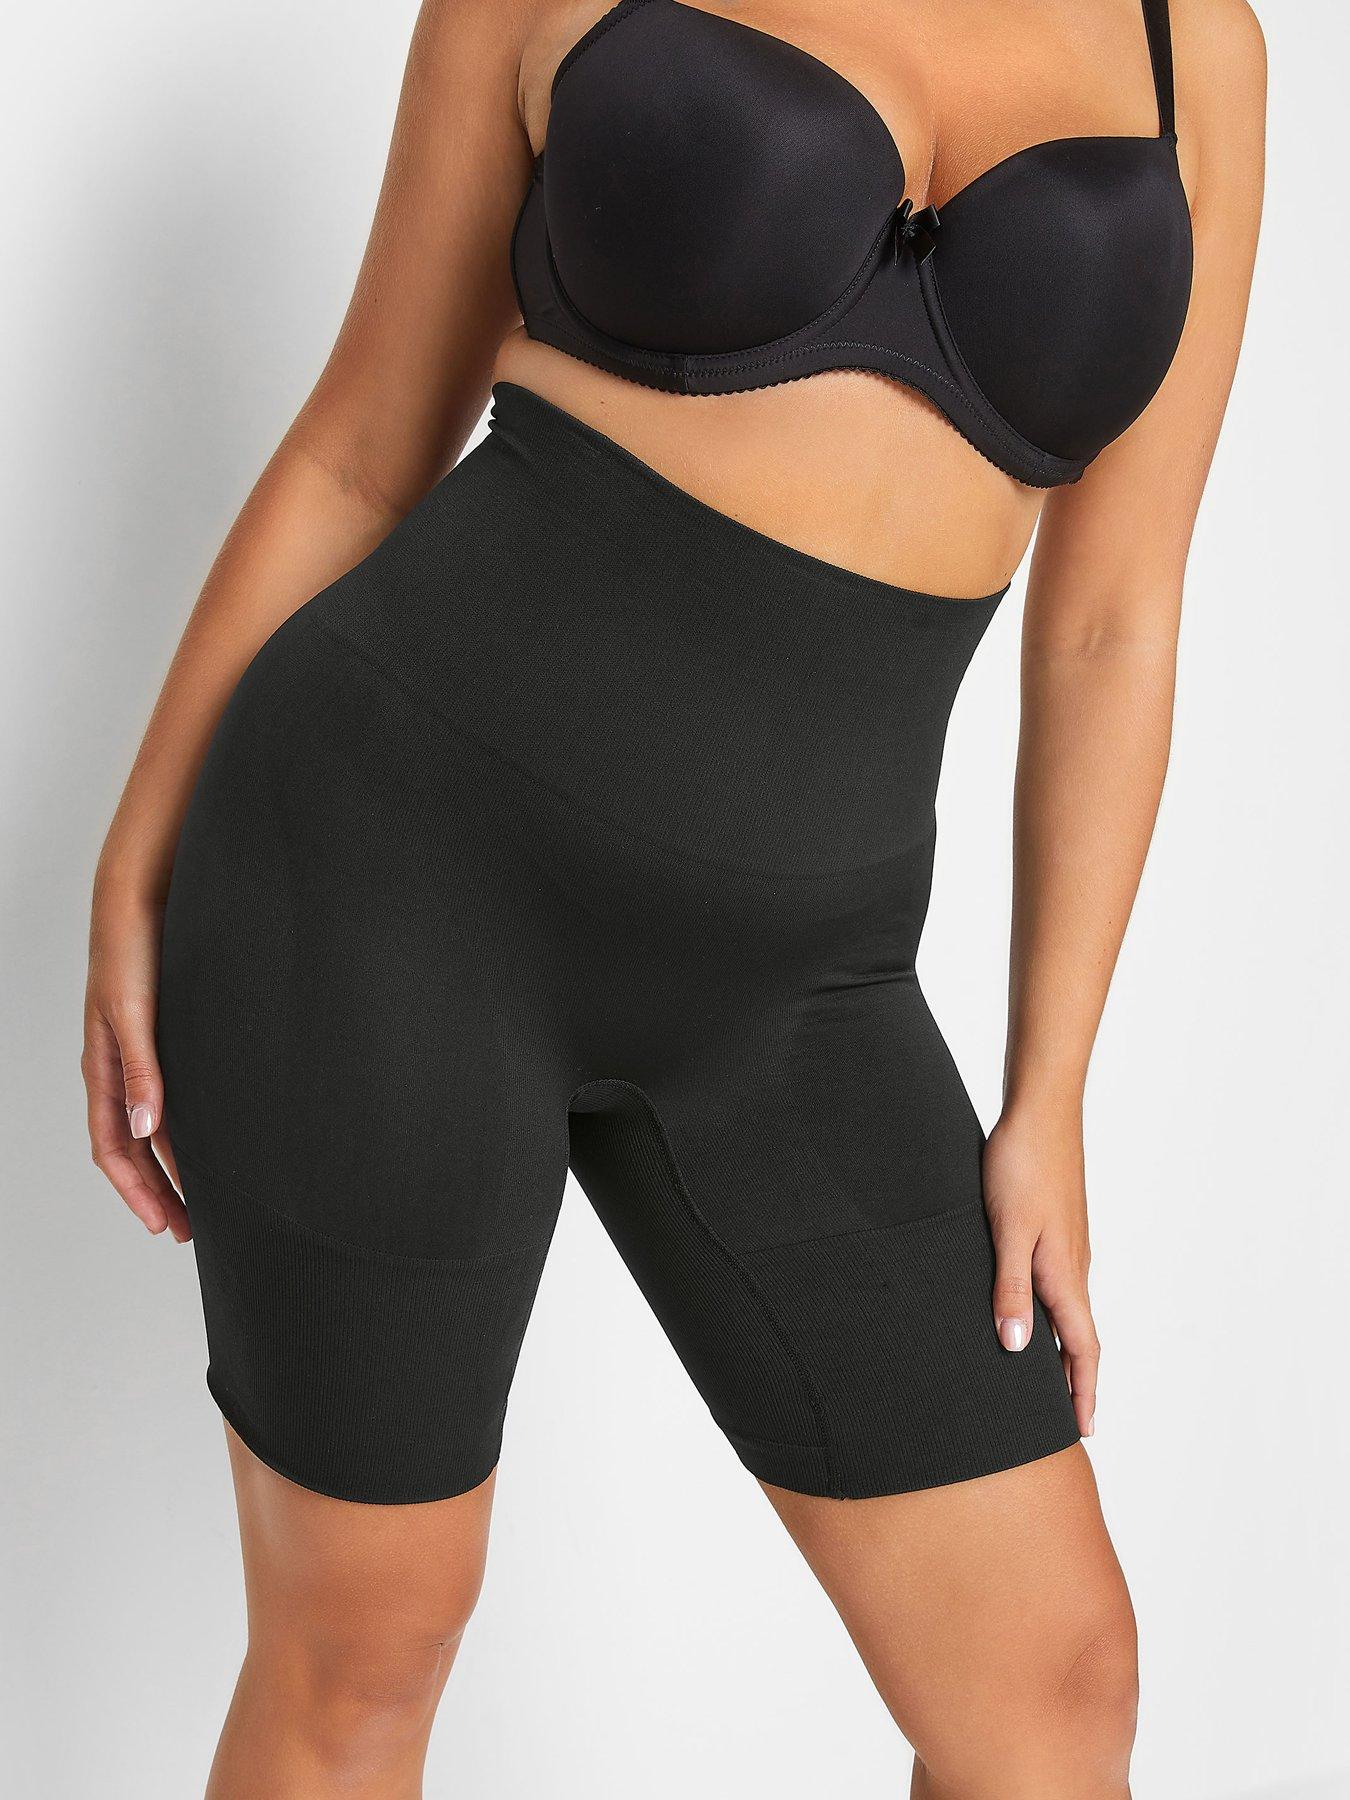 SPANX Flat Out Flawless Extra Firm Control High Waist Shaper